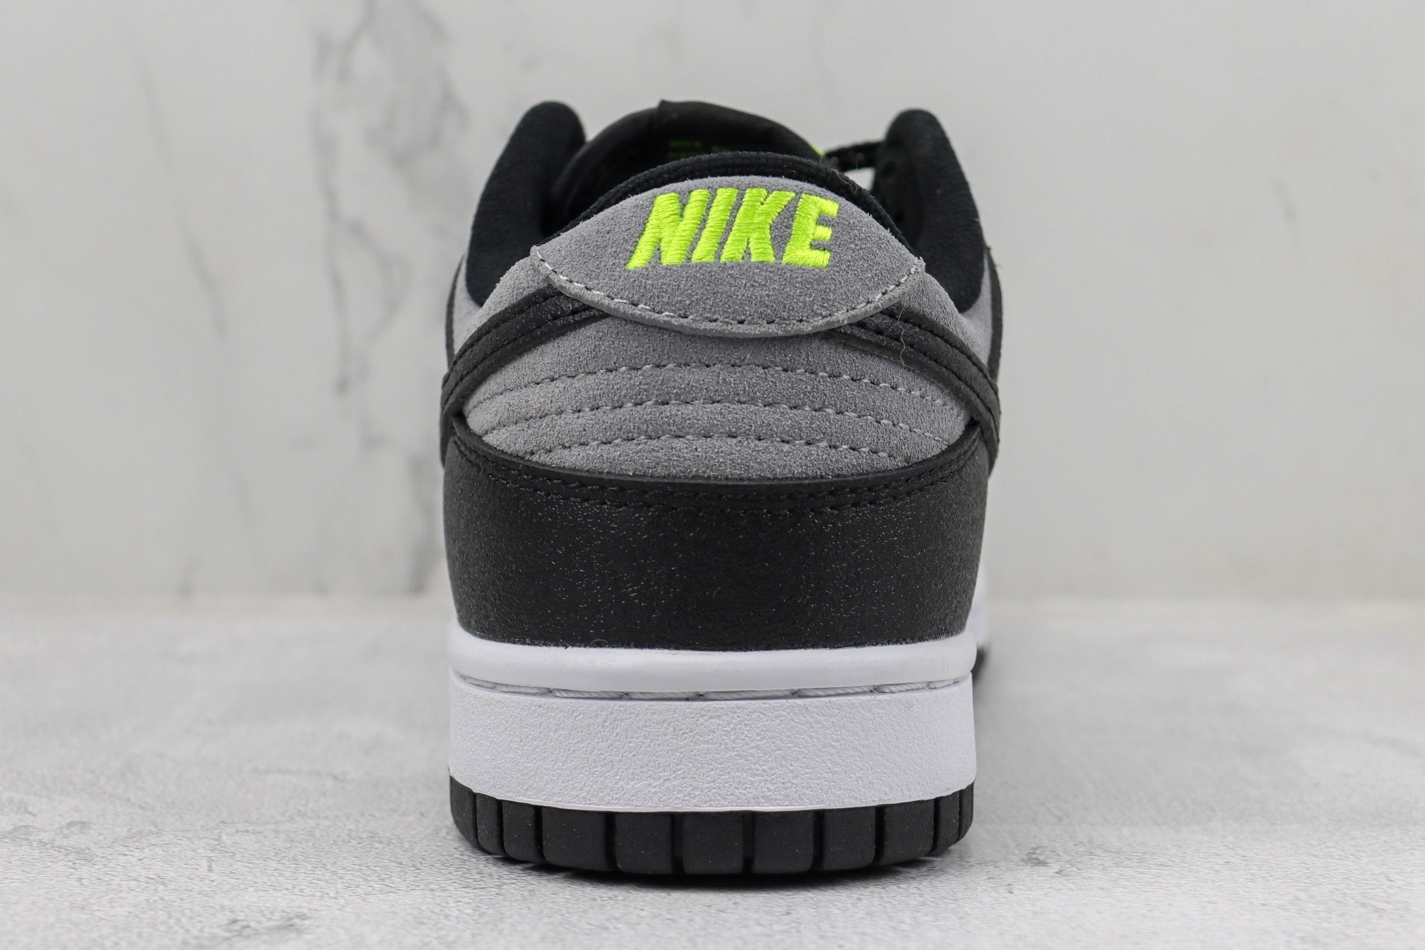 Nike Dunk Low 'Black Grey Green Strike' FQ2205-001 - Stylish and Versatile Sneakers